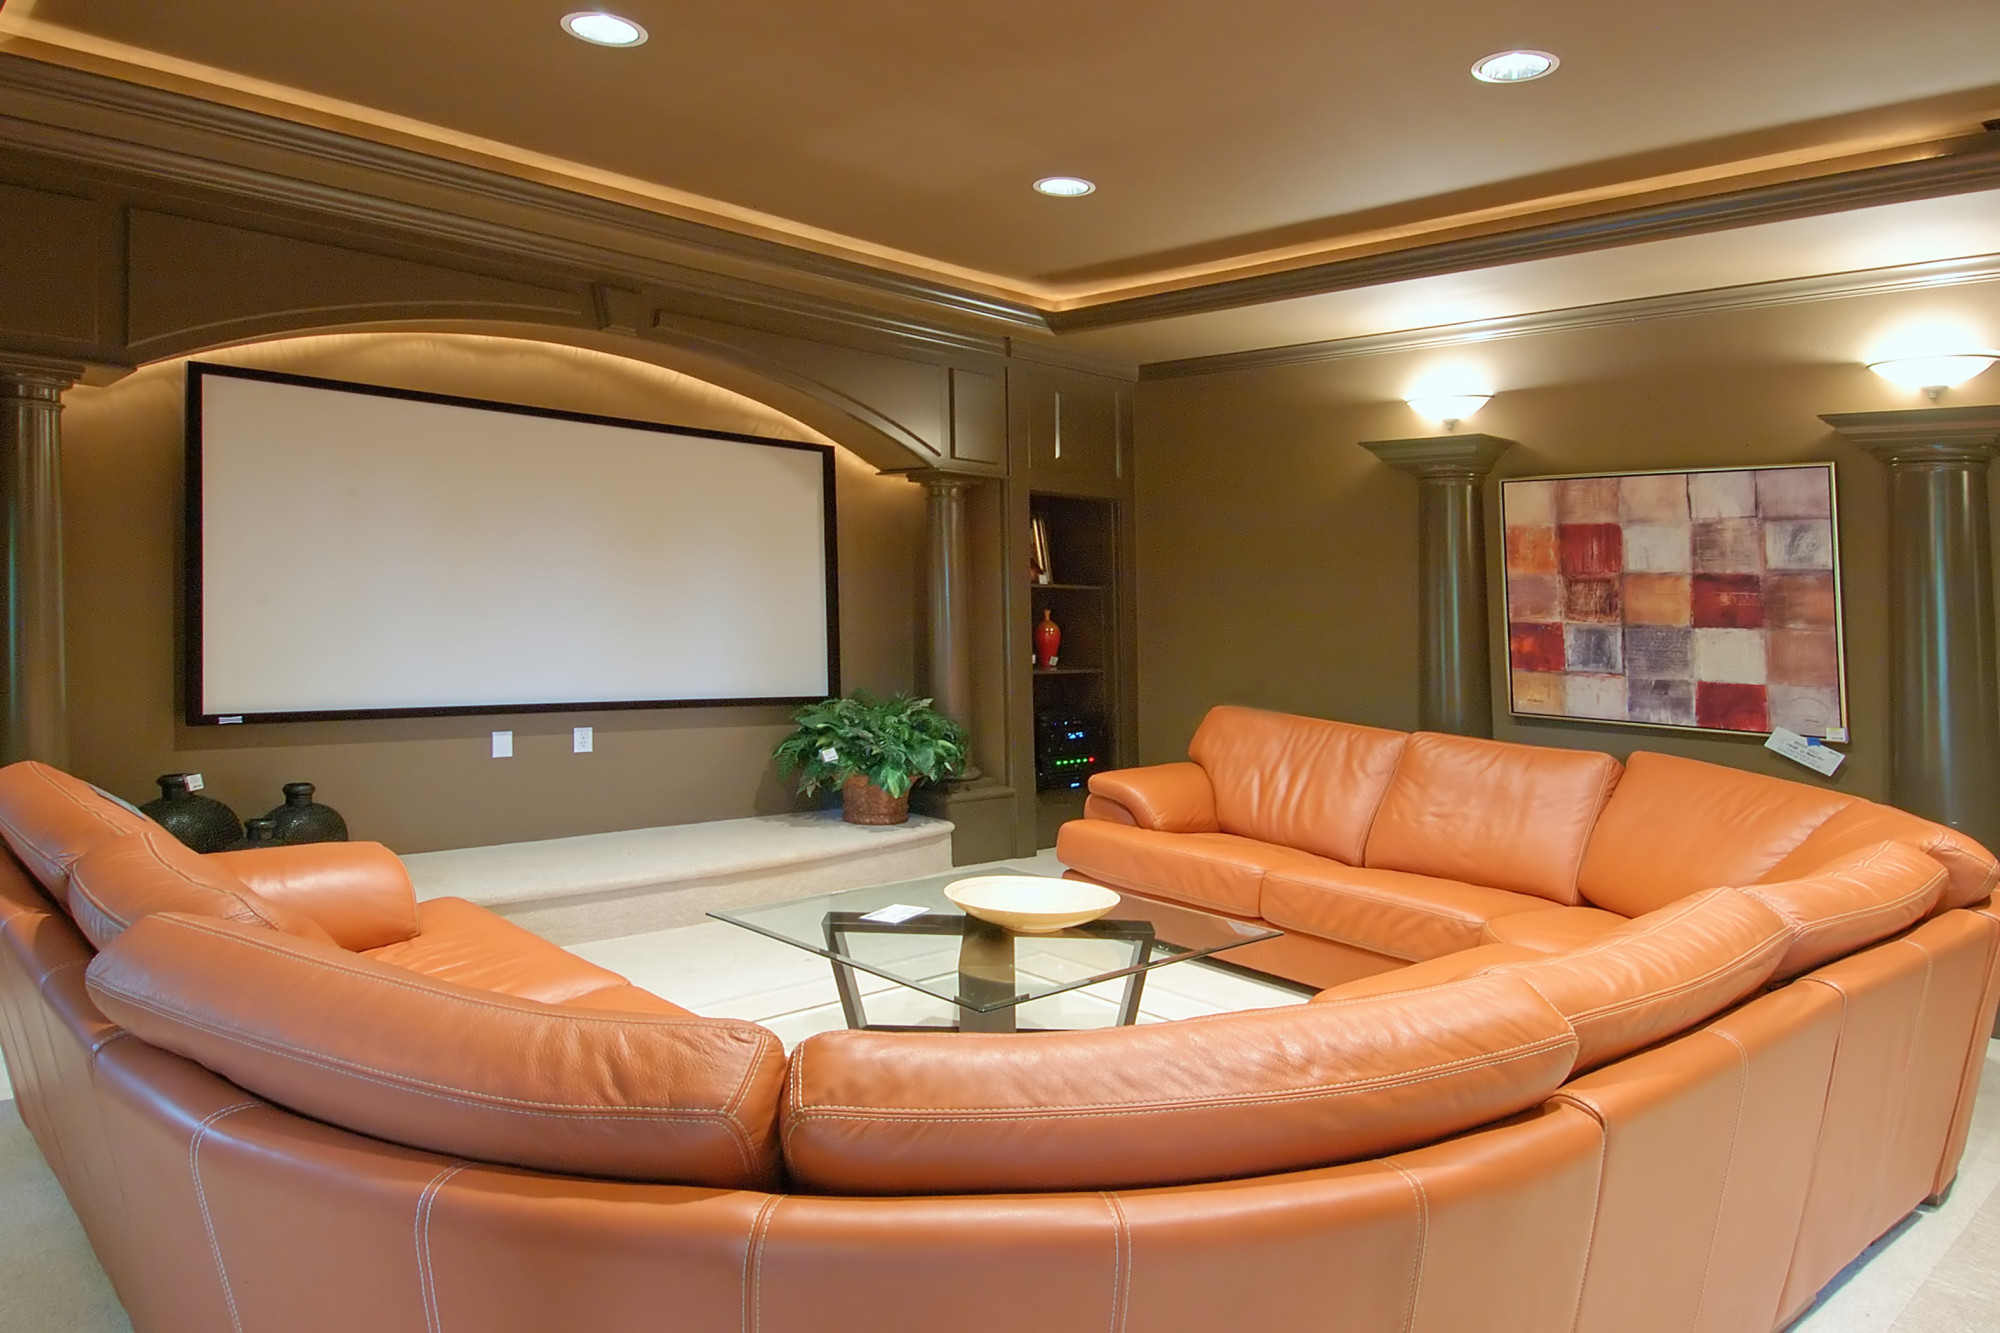 9 Tips for Building the Perfect Home Theater Room on a Budget - Paldrop.com